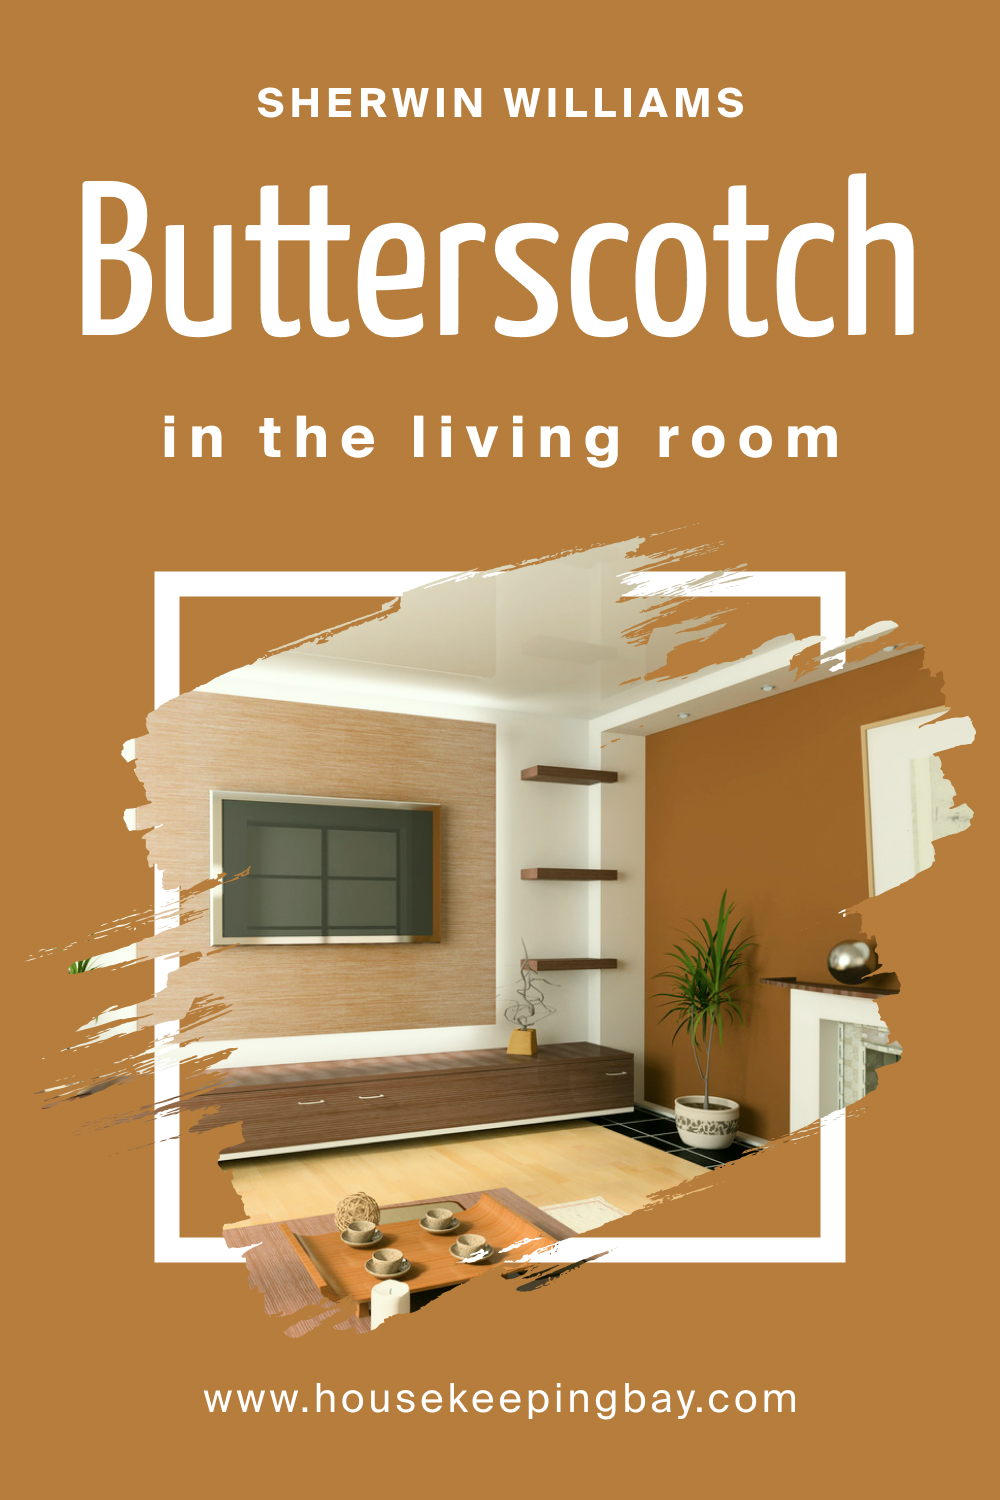 Sherwin Williams. SW 6377 Butterscotch In the Living Room